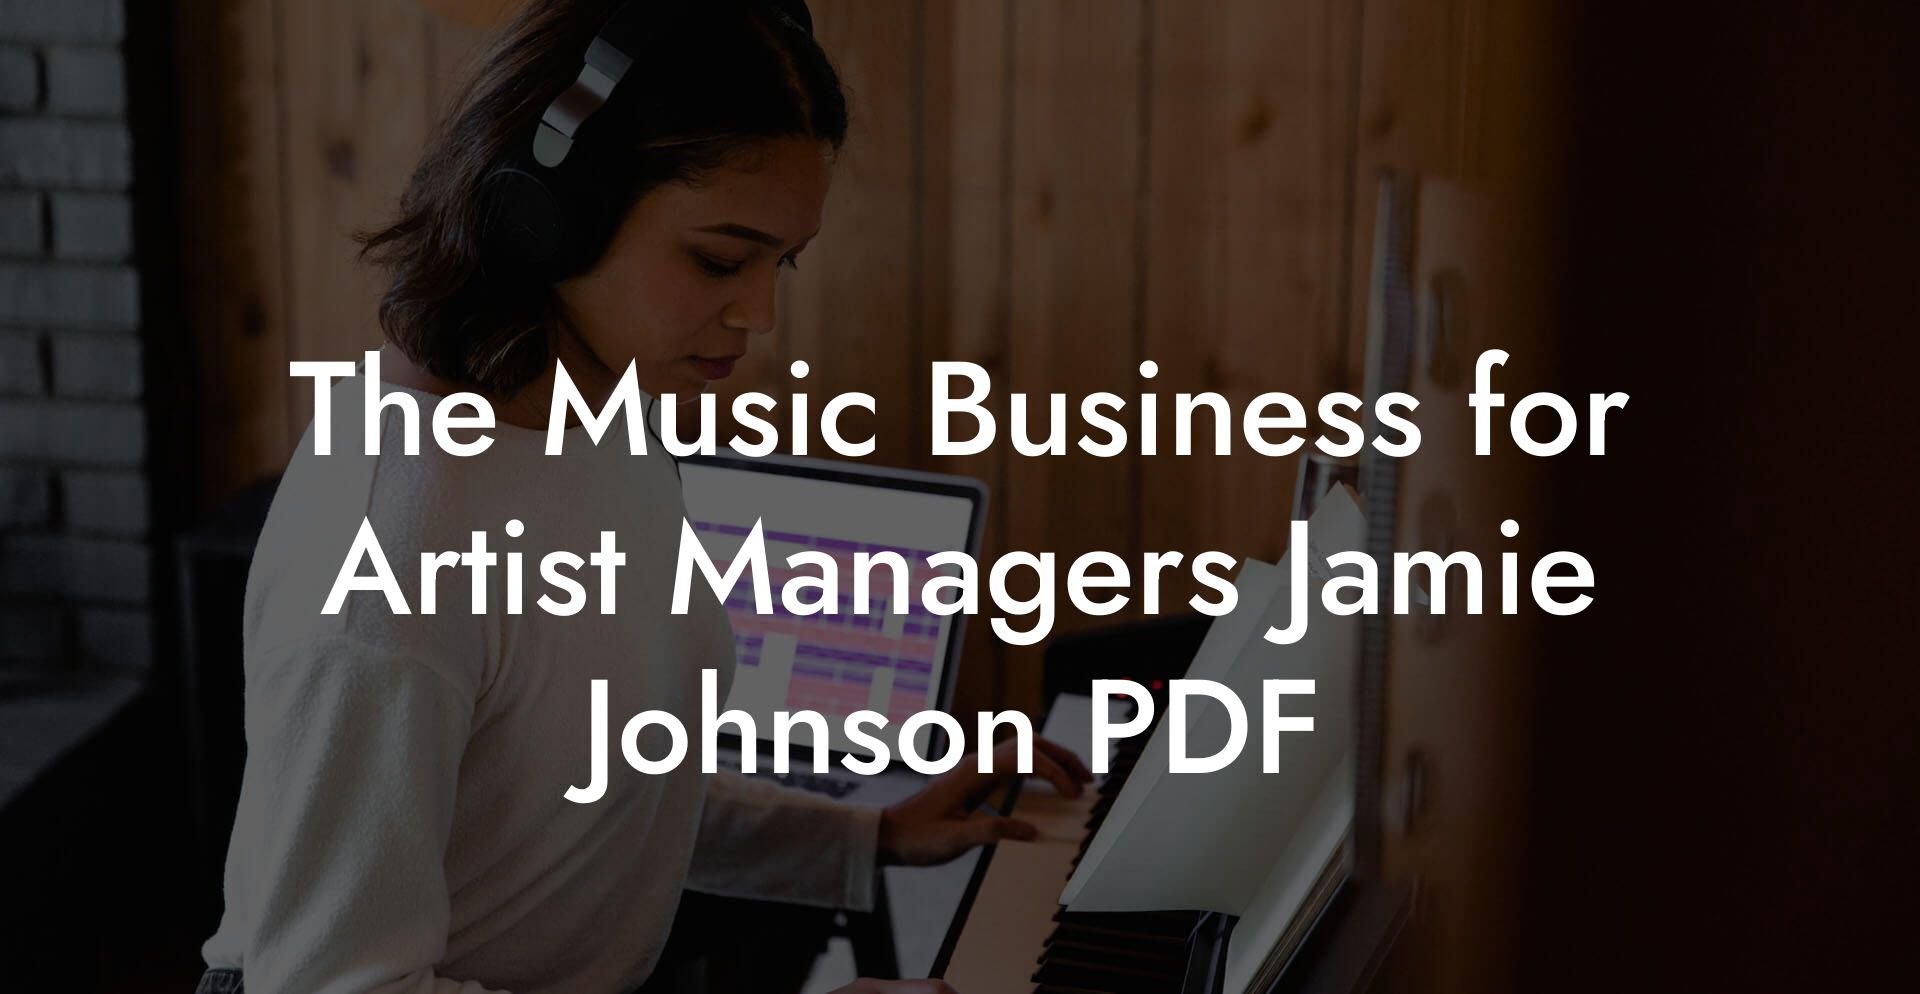 The Music Business for Artist Managers Jamie Johnson PDF